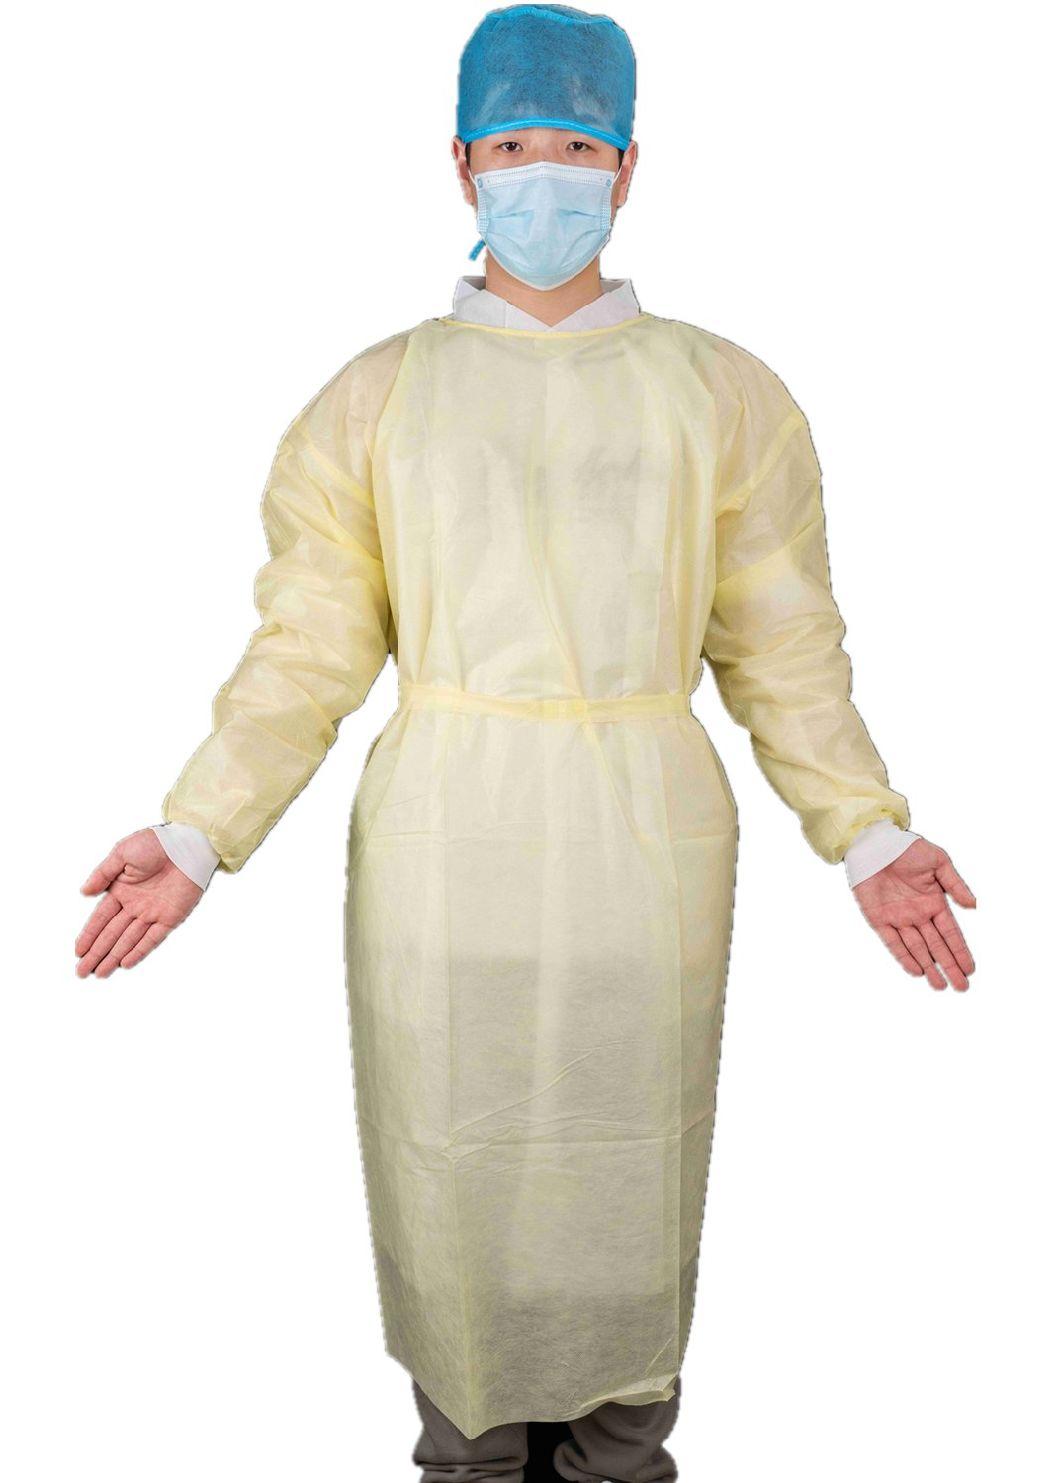 Disposable Good Protective Isolation Gown with Knitted Wrist by SMS Material for Prevent Bacterial and Splash